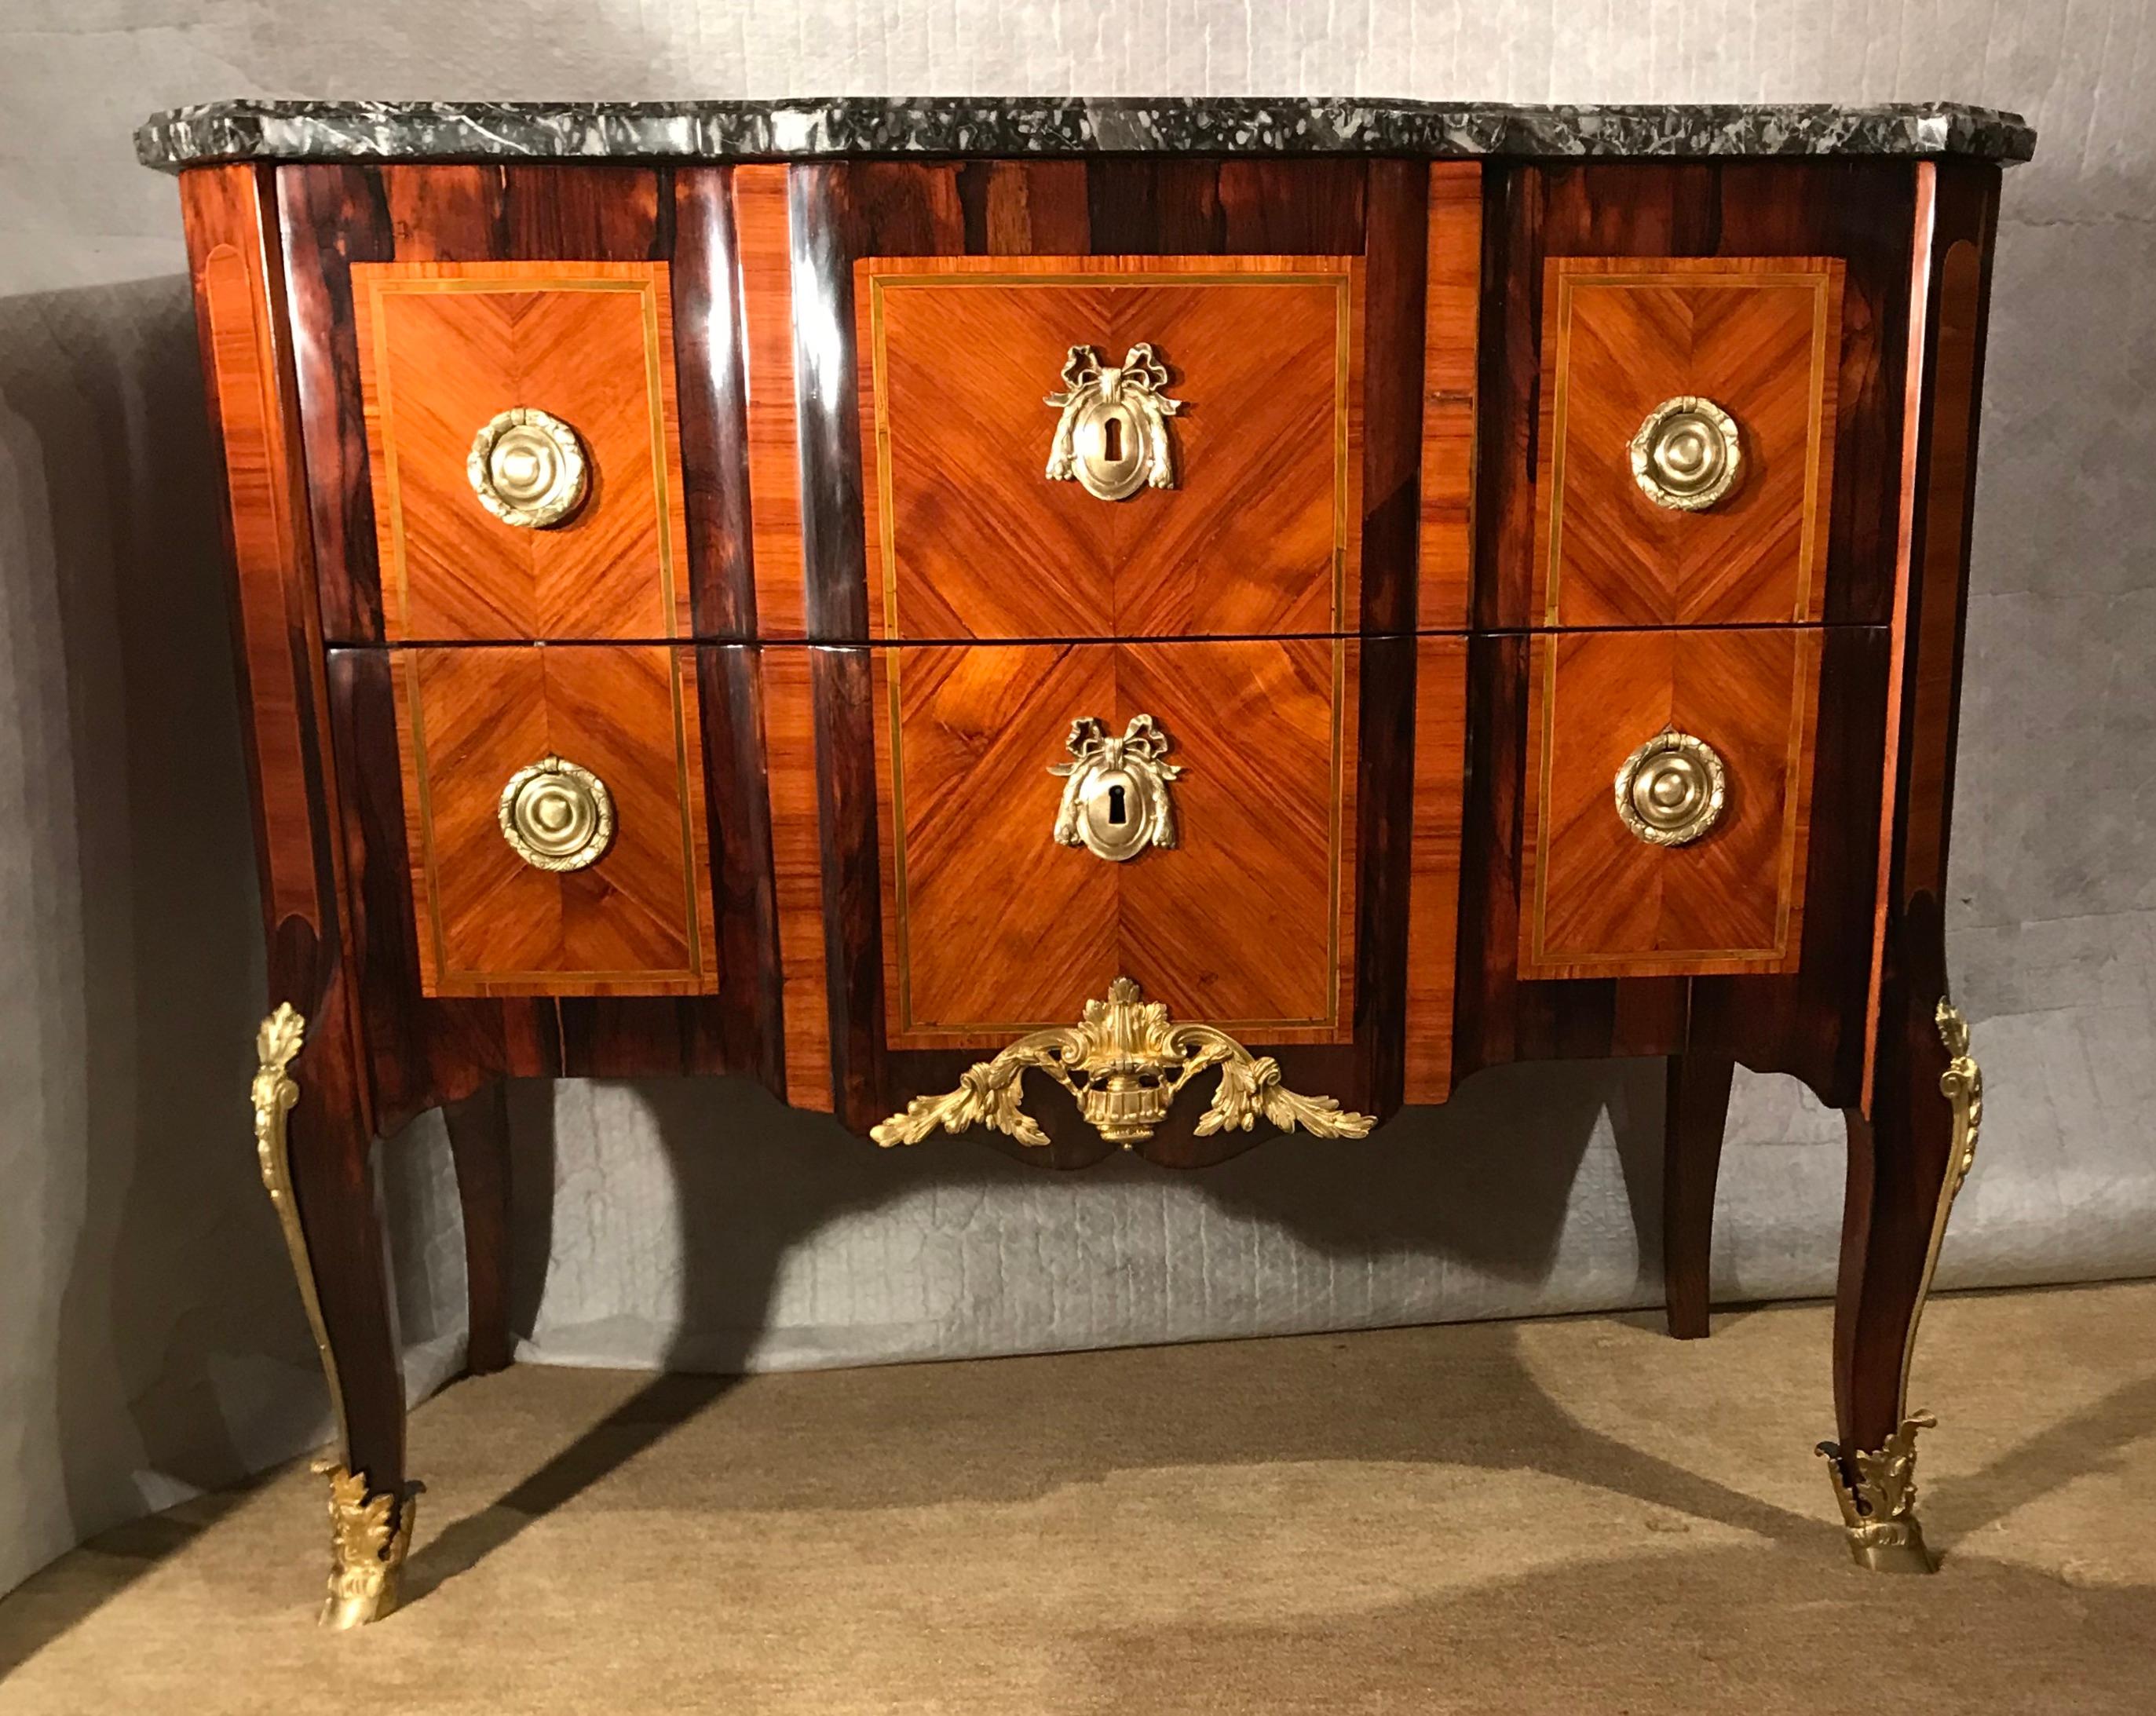 Transition commode, France 1770. 
Exquisite satinwood and king wood veneer with delicate green colored wood inlays framing the satinwood parts. Original brass and bronze fittings and marble top. This is a wonderful example of the high craftsmanship